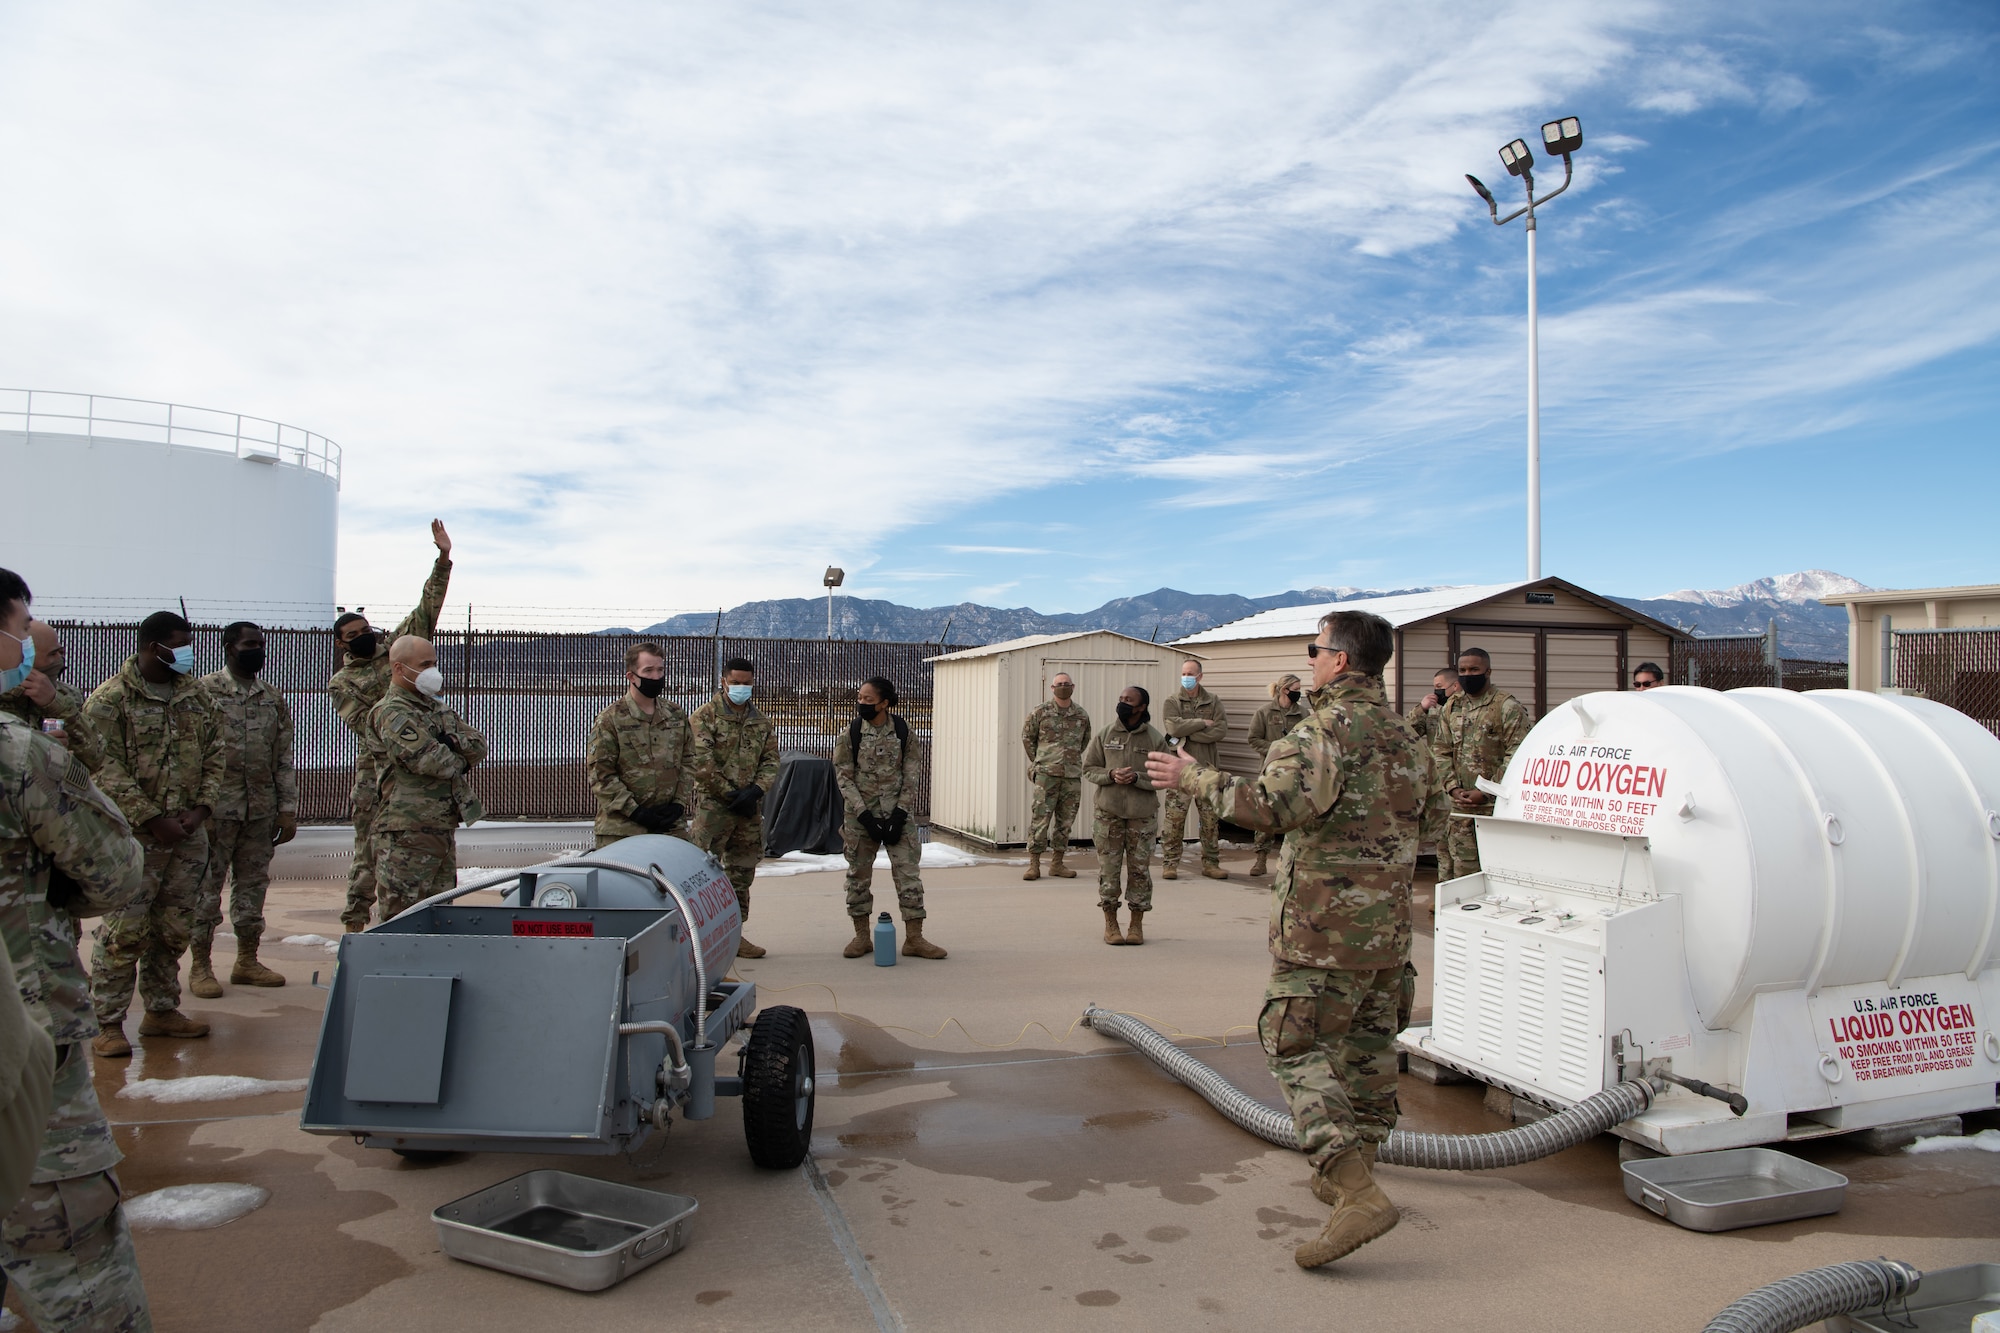 An Airmen speaks to a small group of soldiers in front of a large white container labeled "LIQUID OXYGEN" and a gray container beside him.